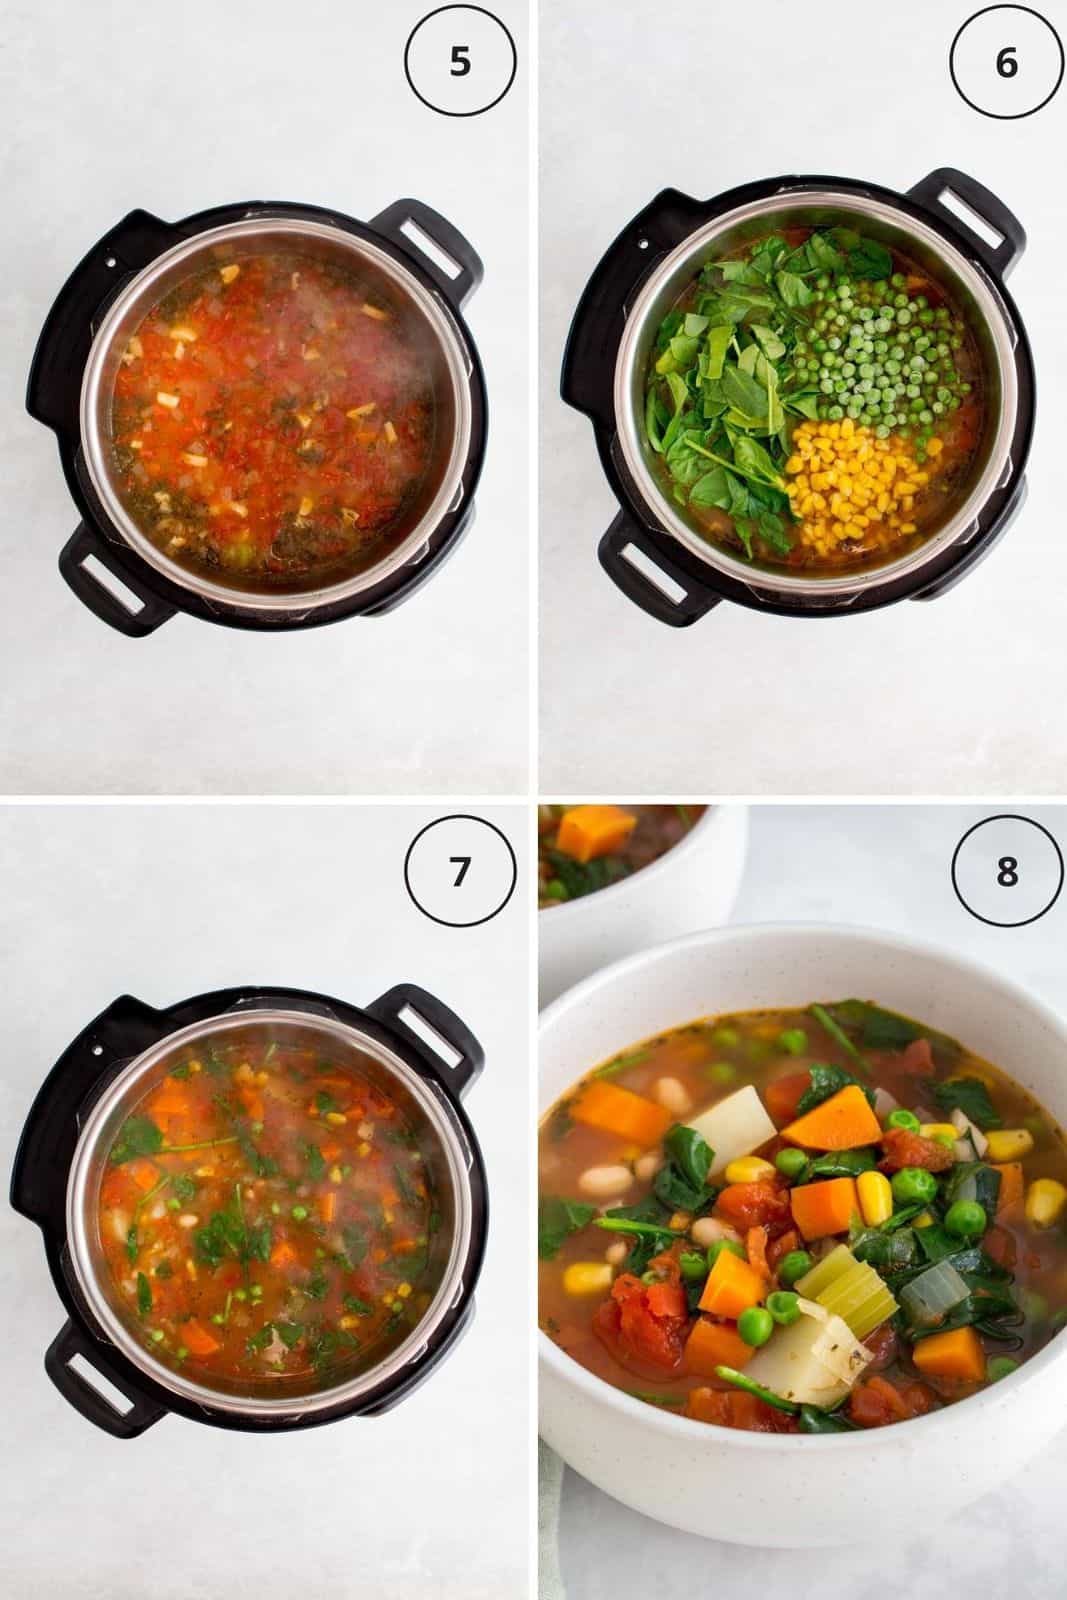 Set of 4 photos showing spinach, peas, and corn added to cooked soup.